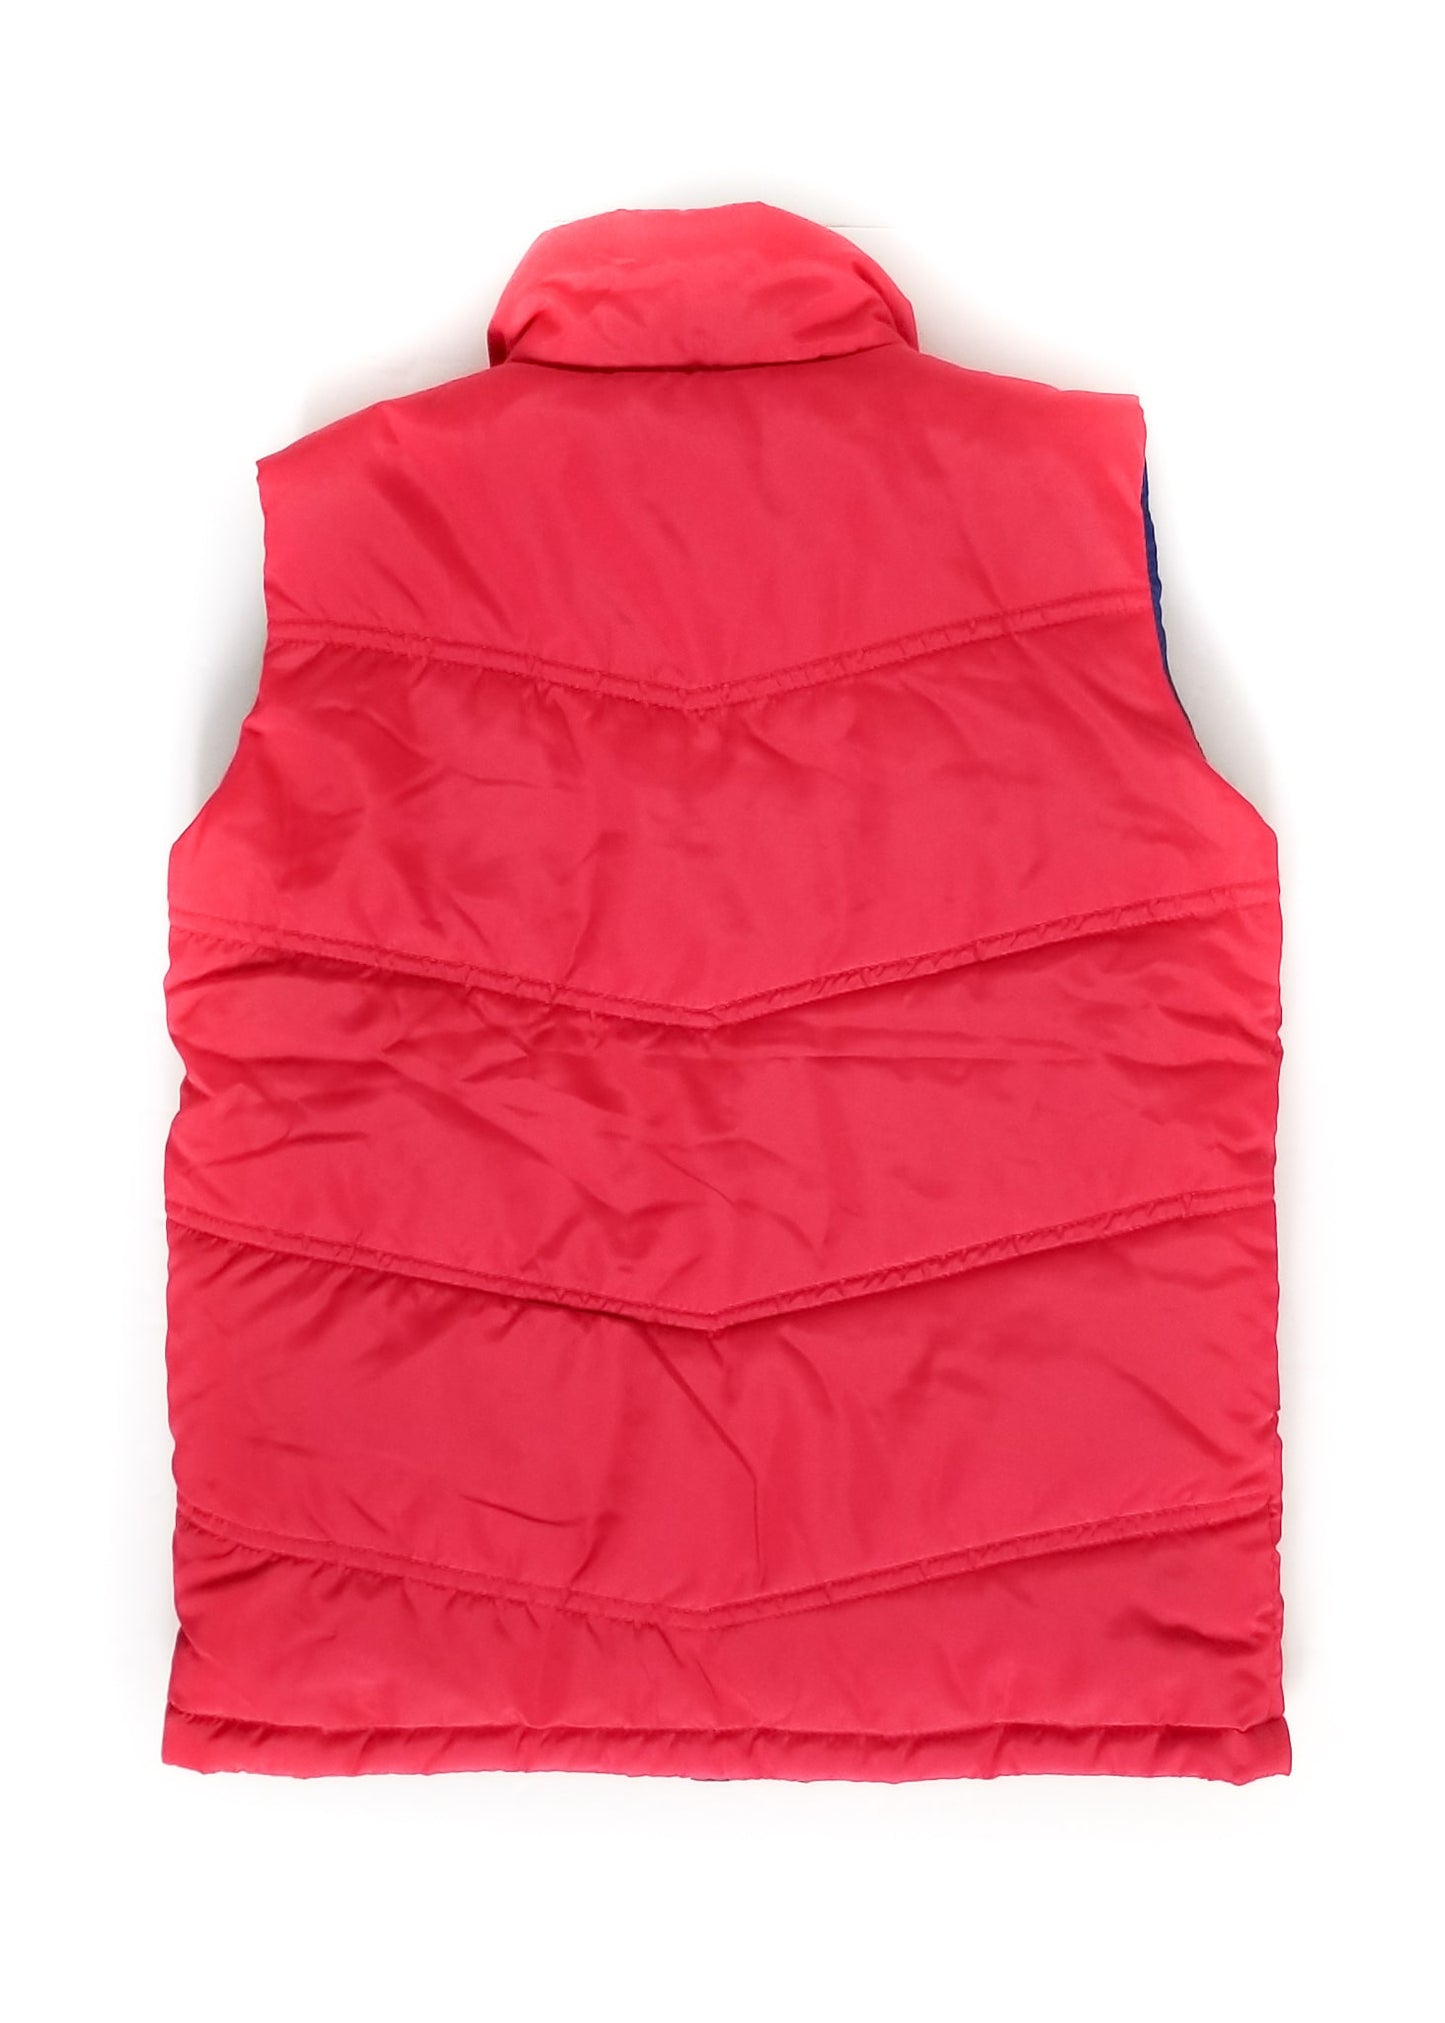 Joules Puffer Vest - Red - Youth 6 Years